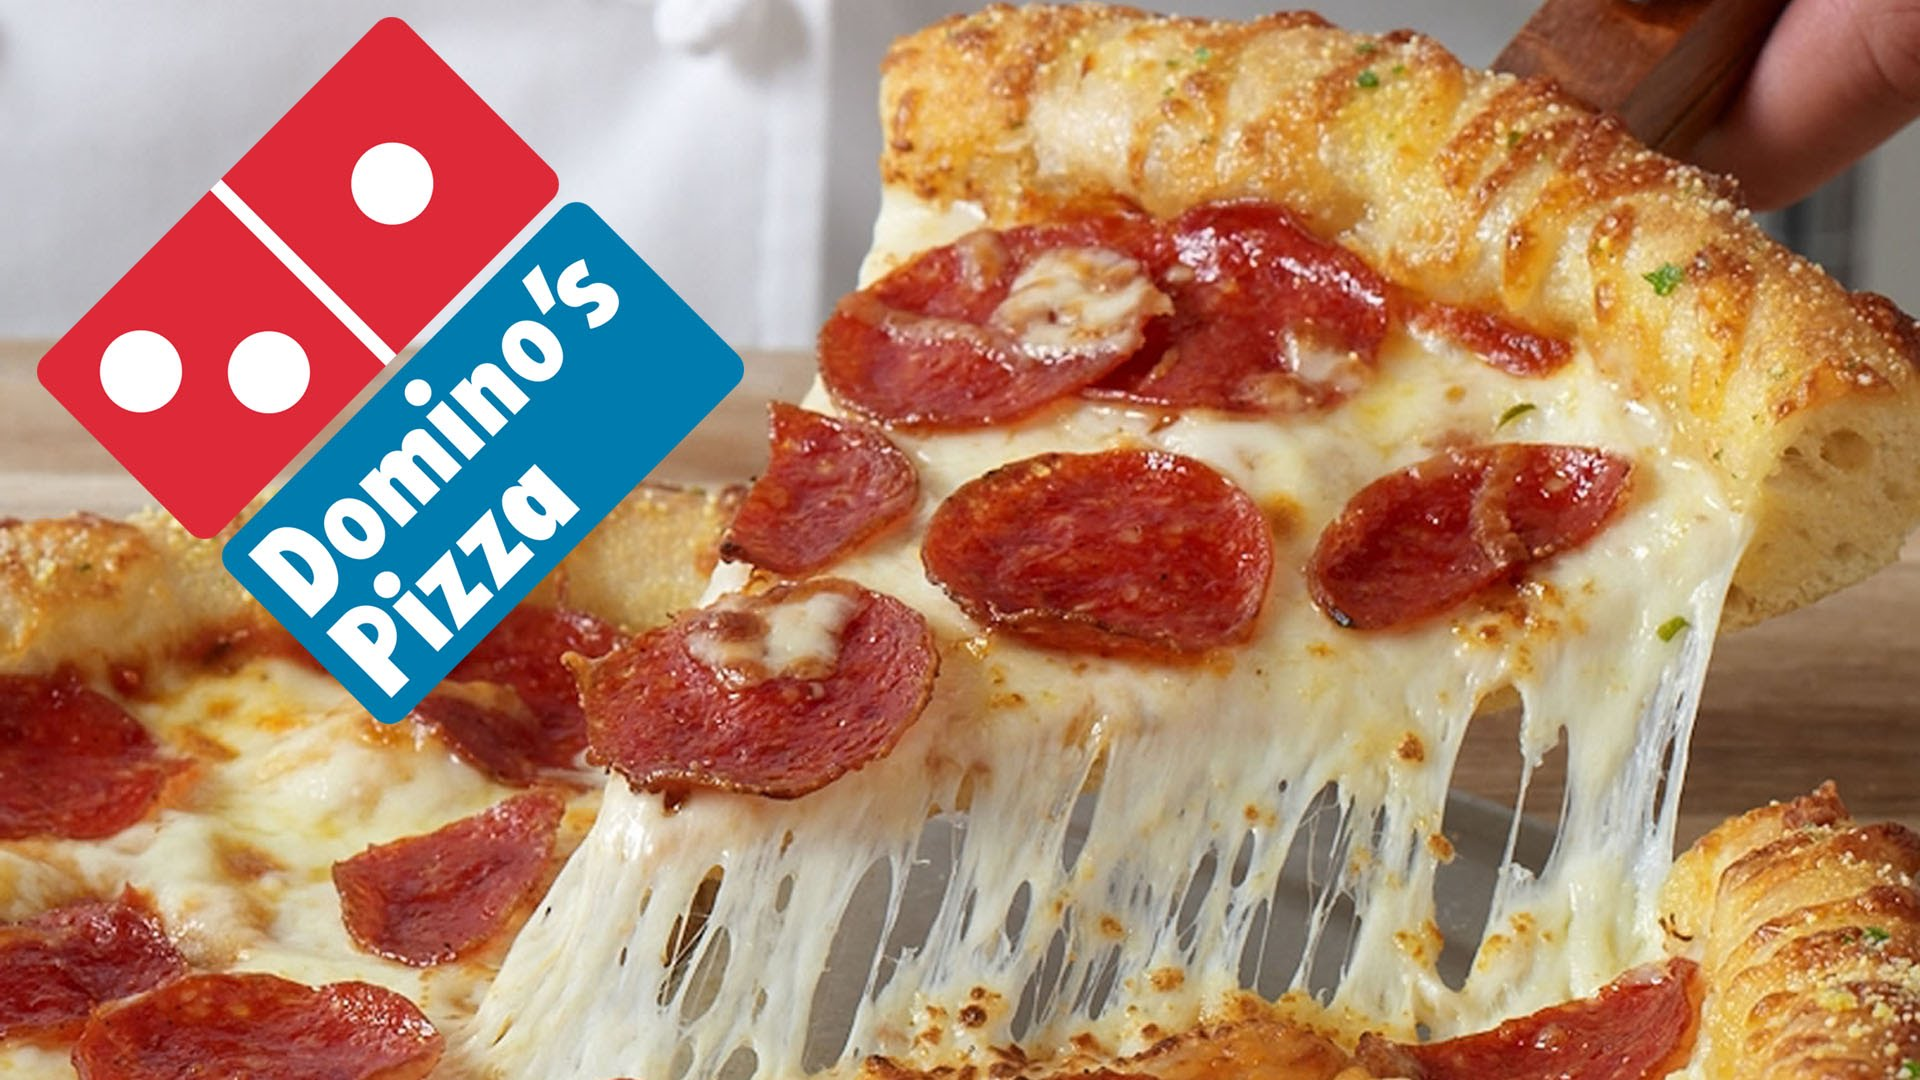 FREE Pizza from Domino’s for the First 4,200 Each Day